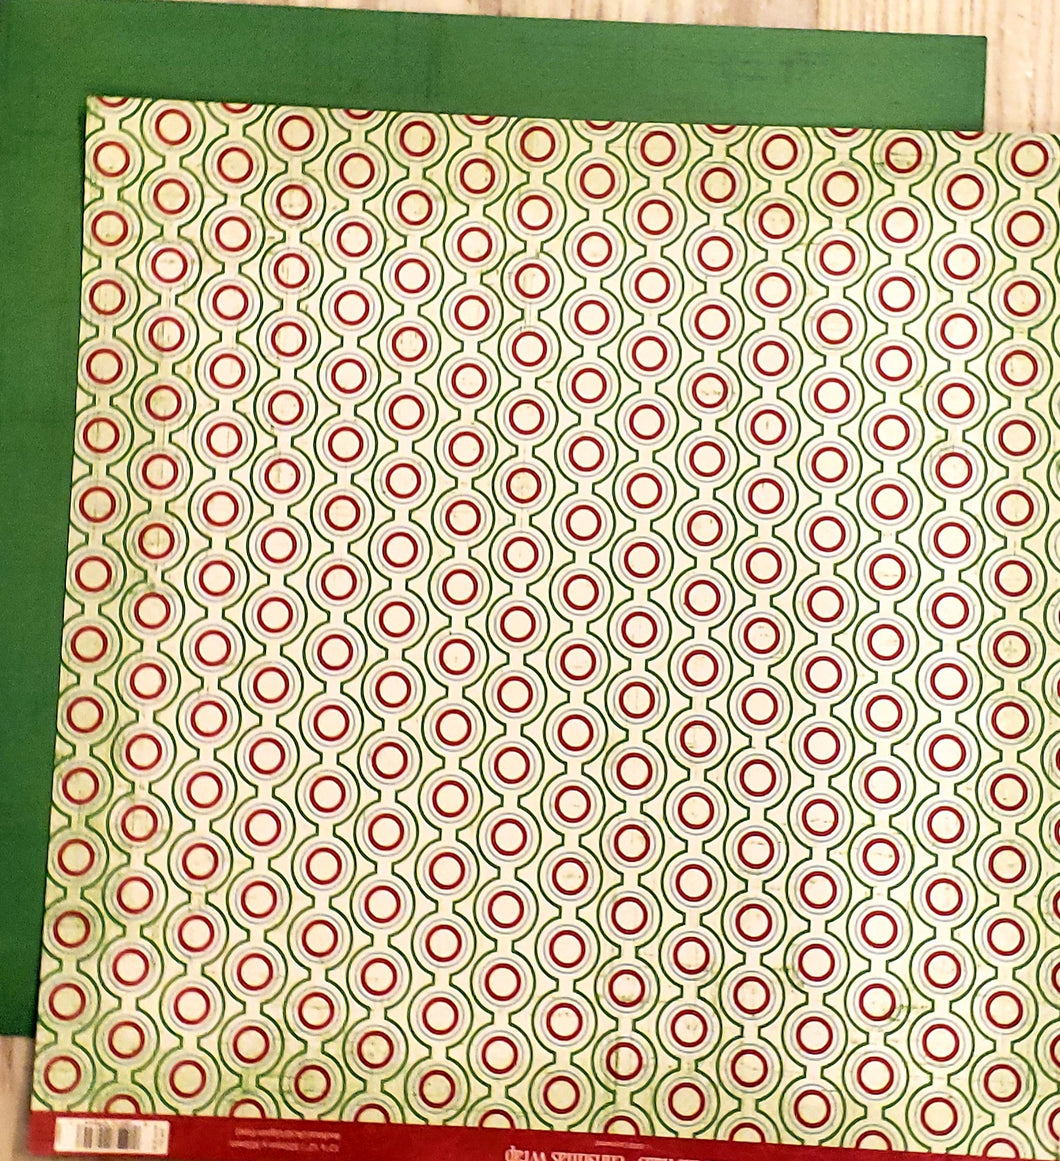 TpC studios double Sided card stock paper 12 x 12 - Deck the halls Christmas wrap - Christmas